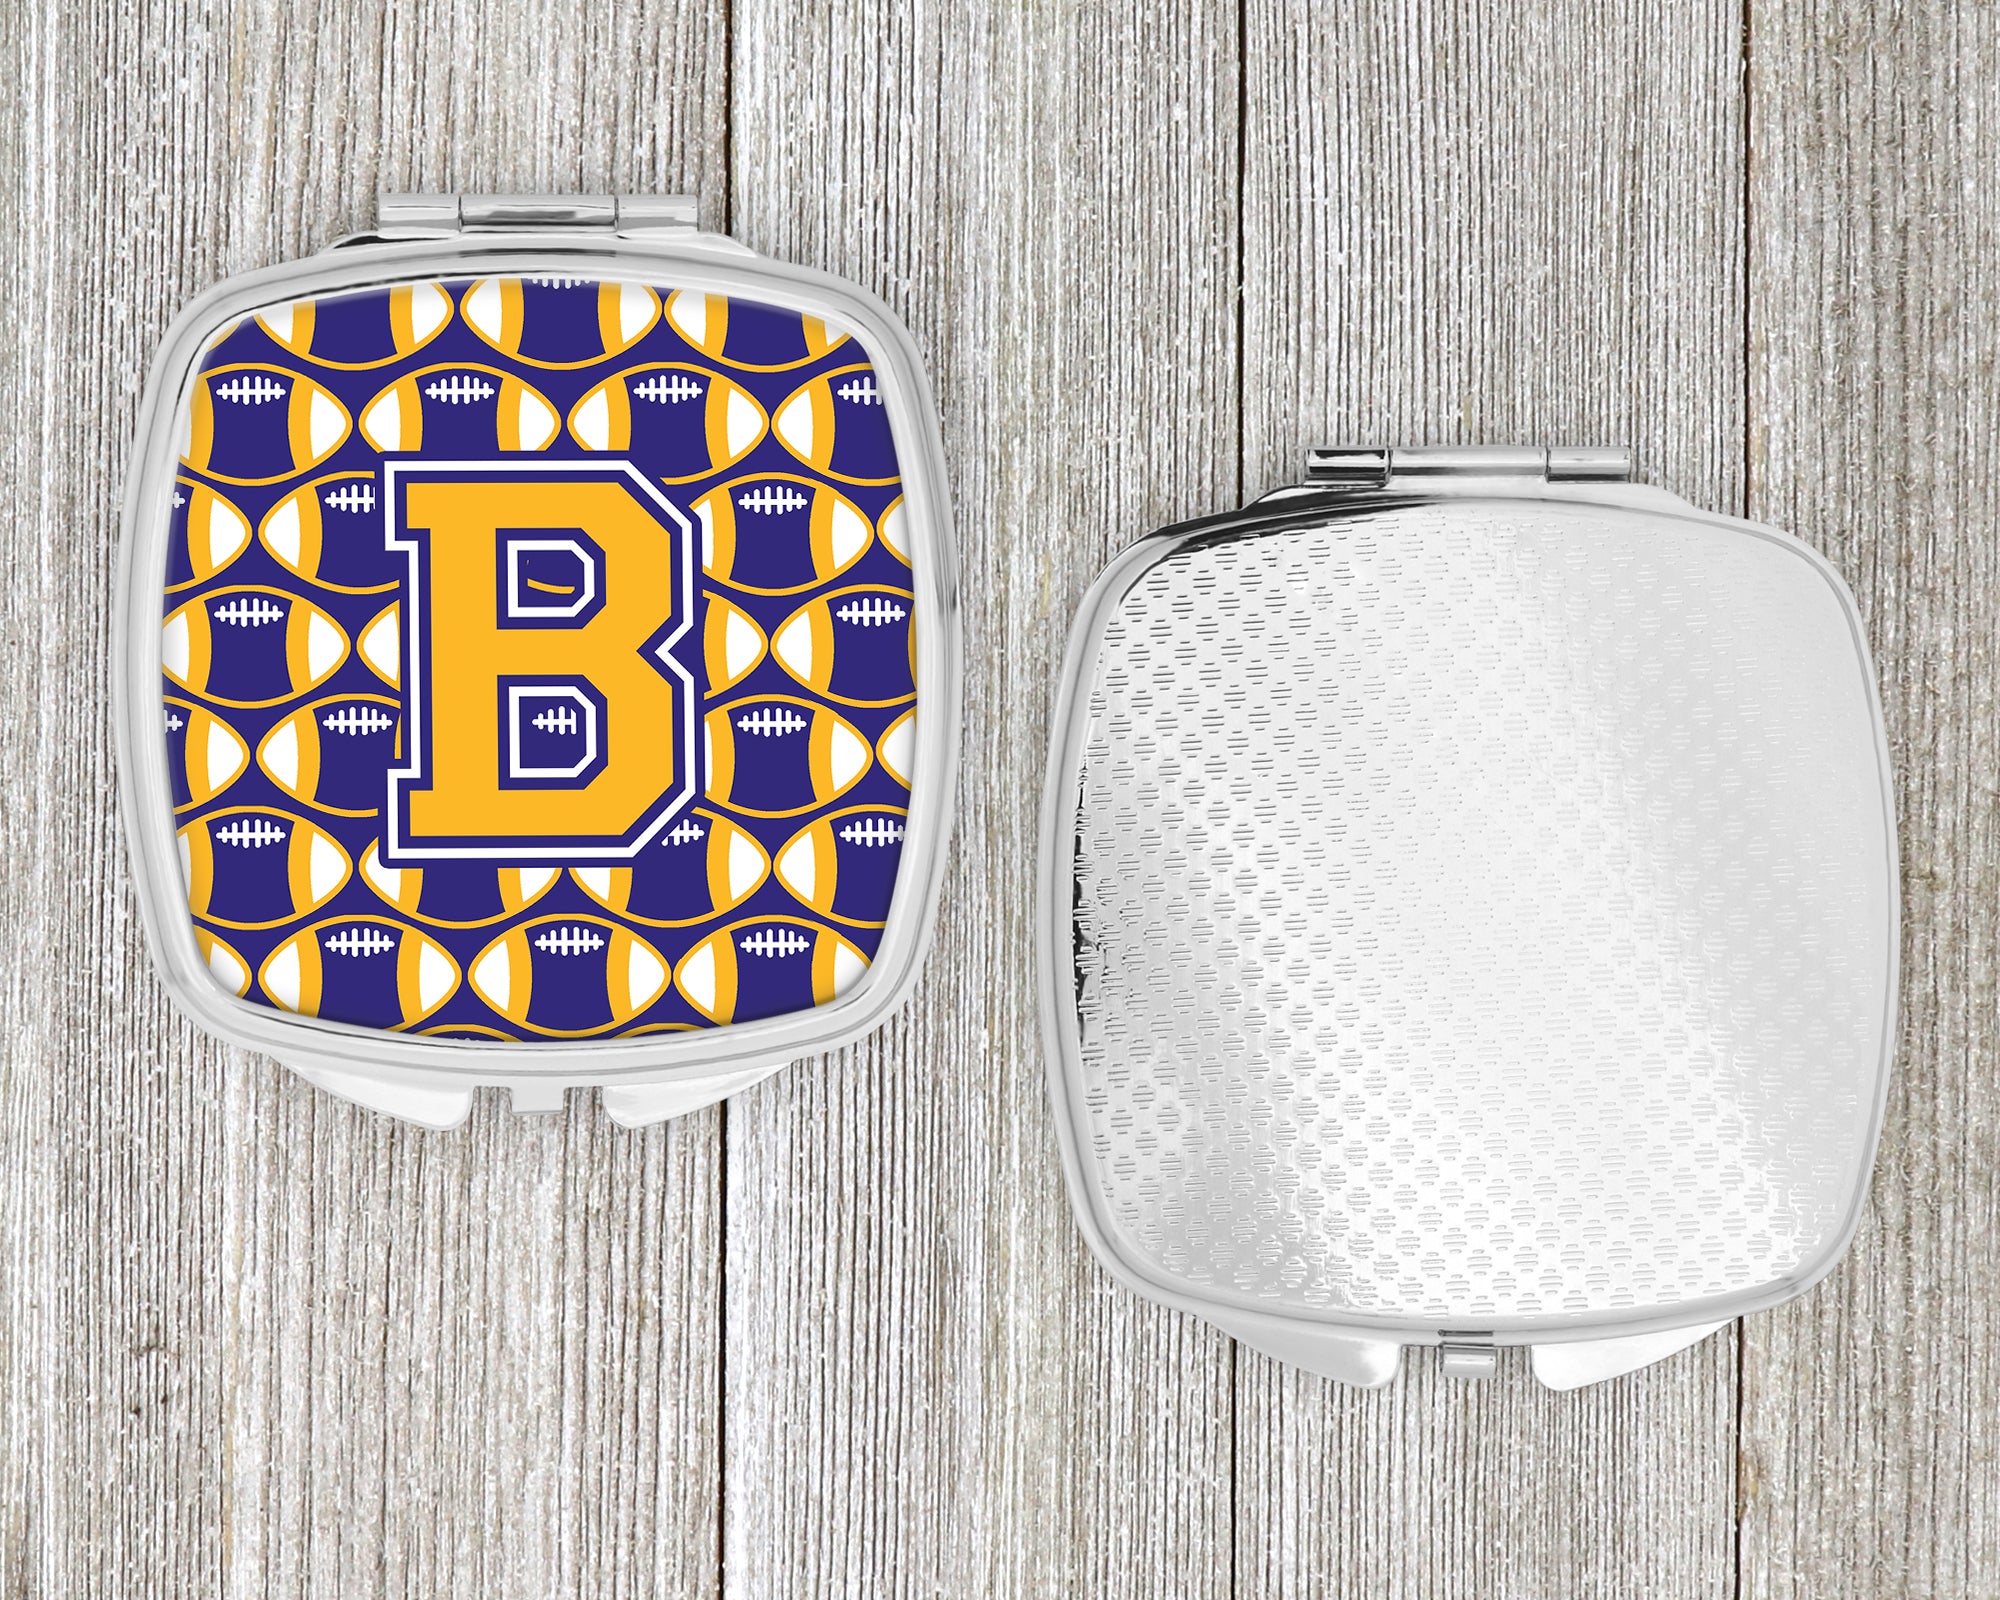 Letter B Football Purple and Gold Compact Mirror CJ1064-BSCM